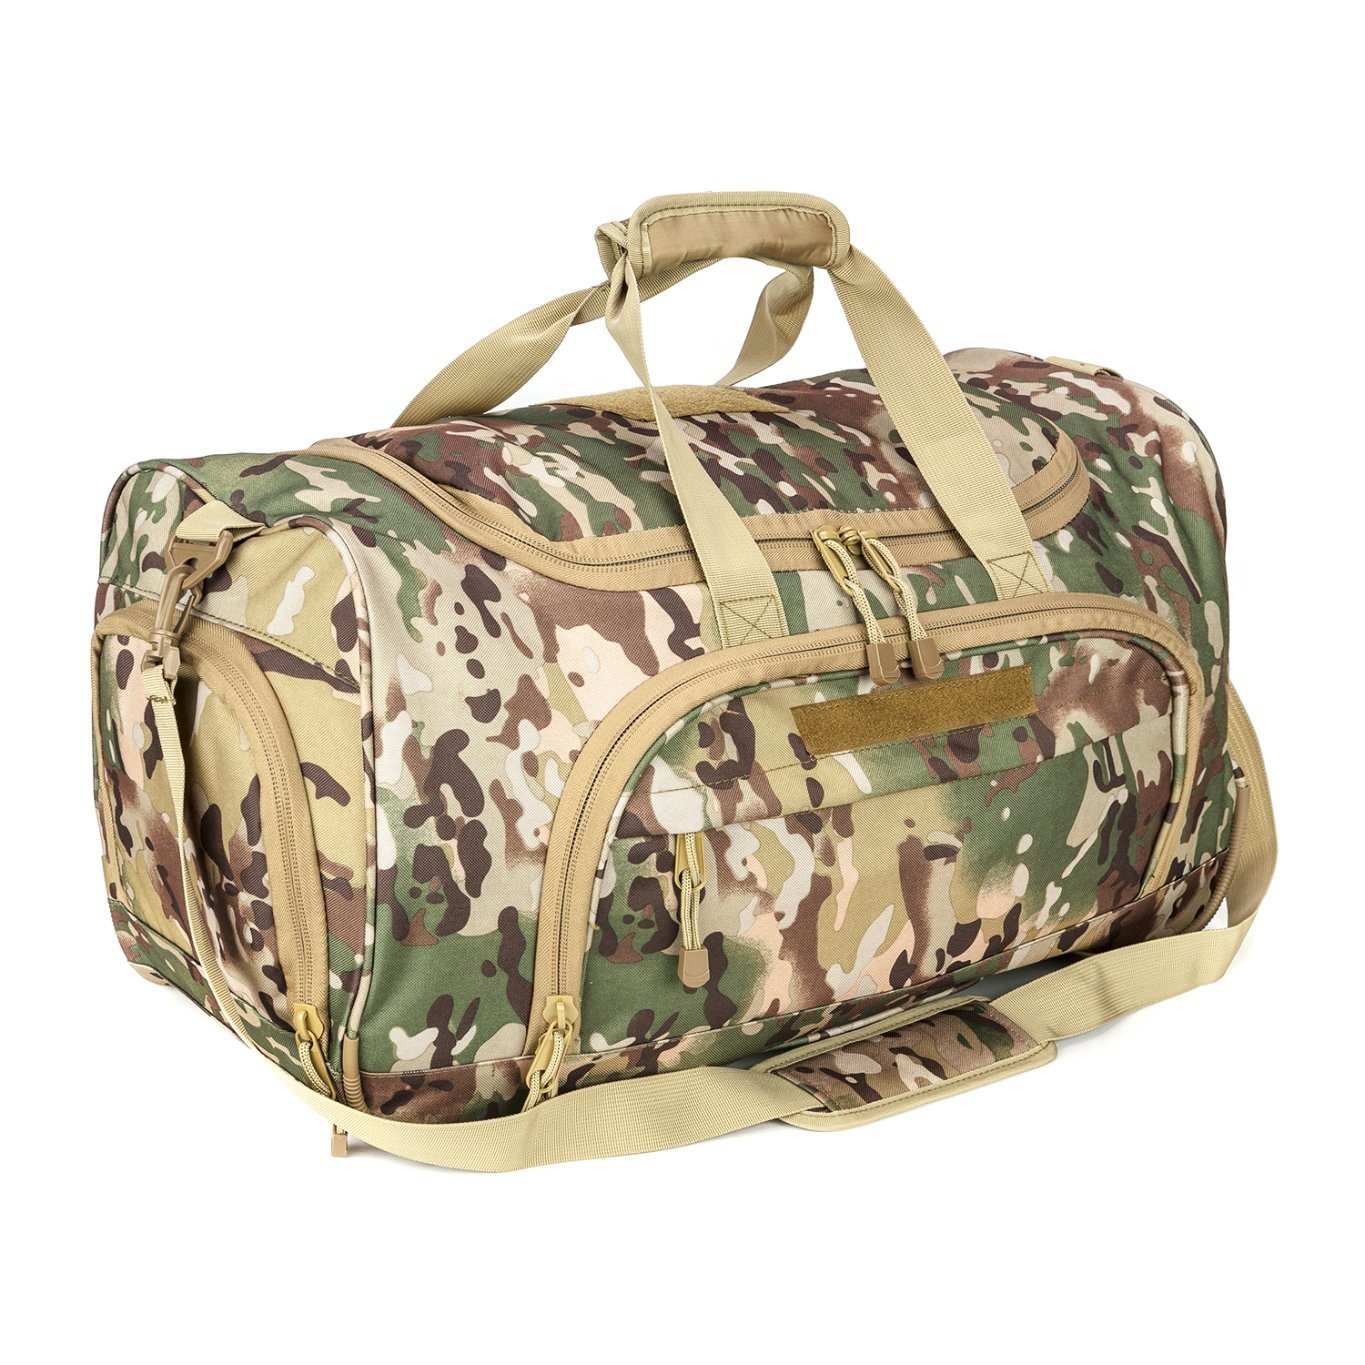 Premium Military Tactical Large Capacity Bag with Shoe Compartment